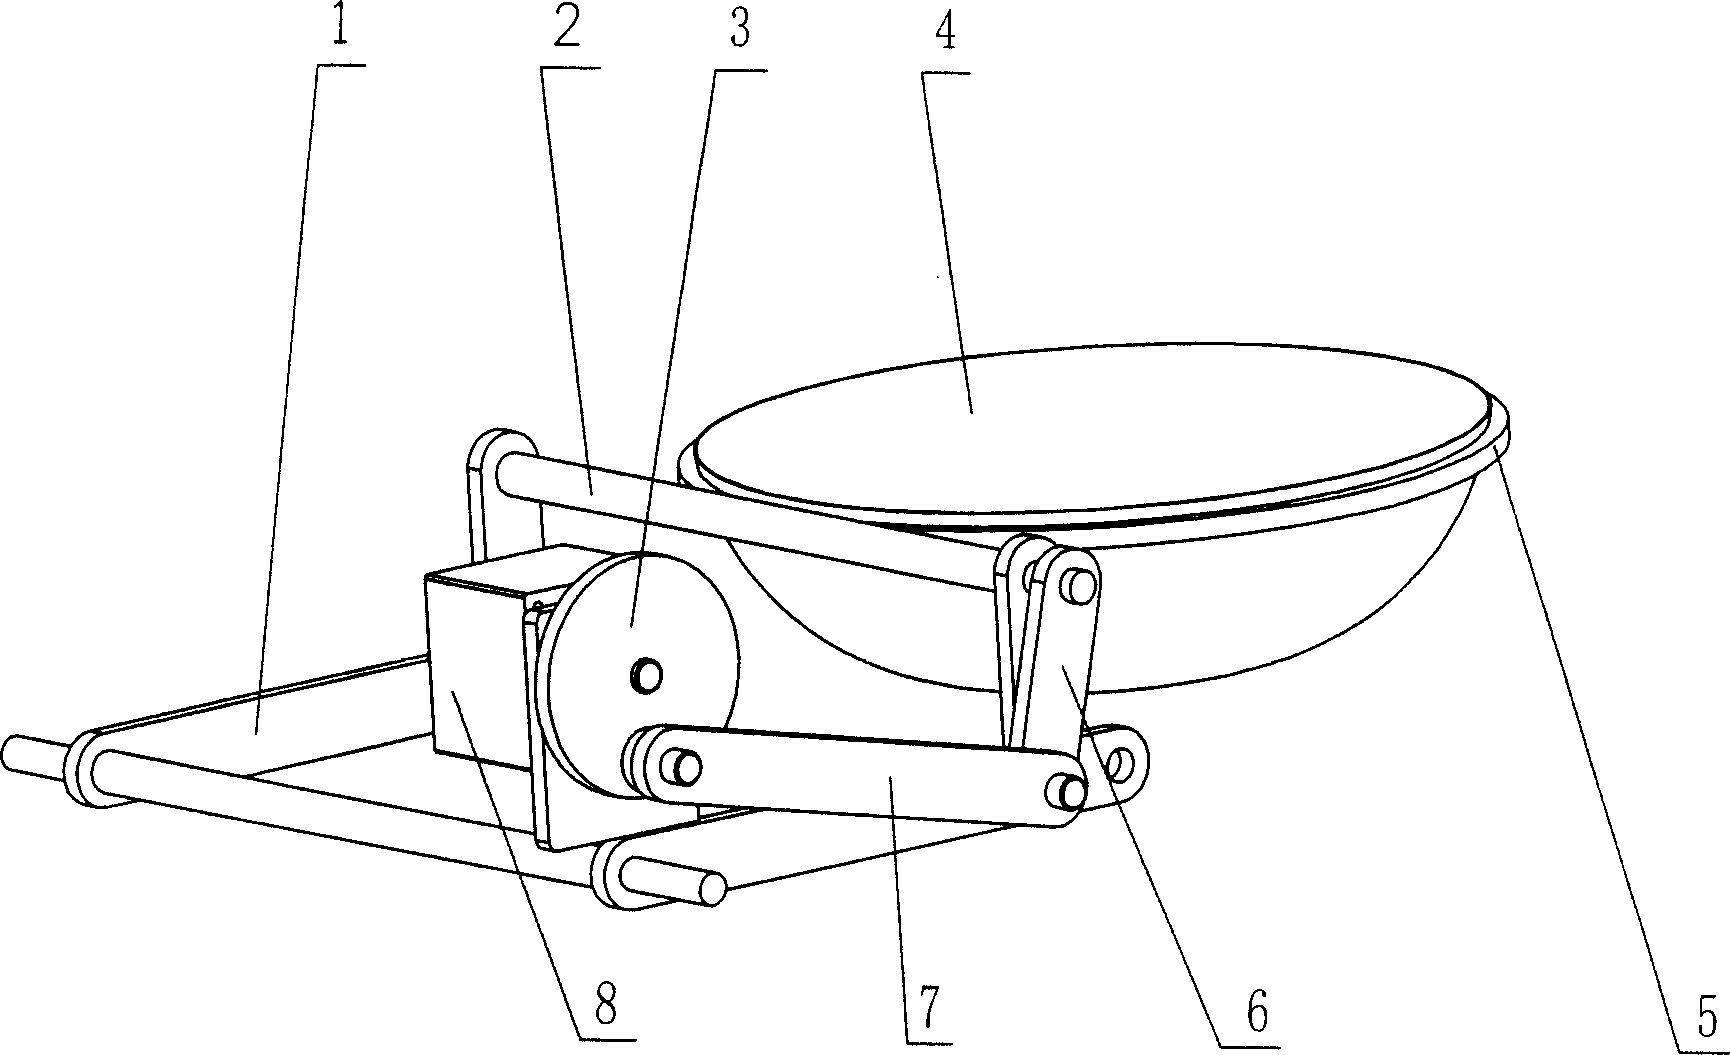 Method and device for turning-over fried dish in pan